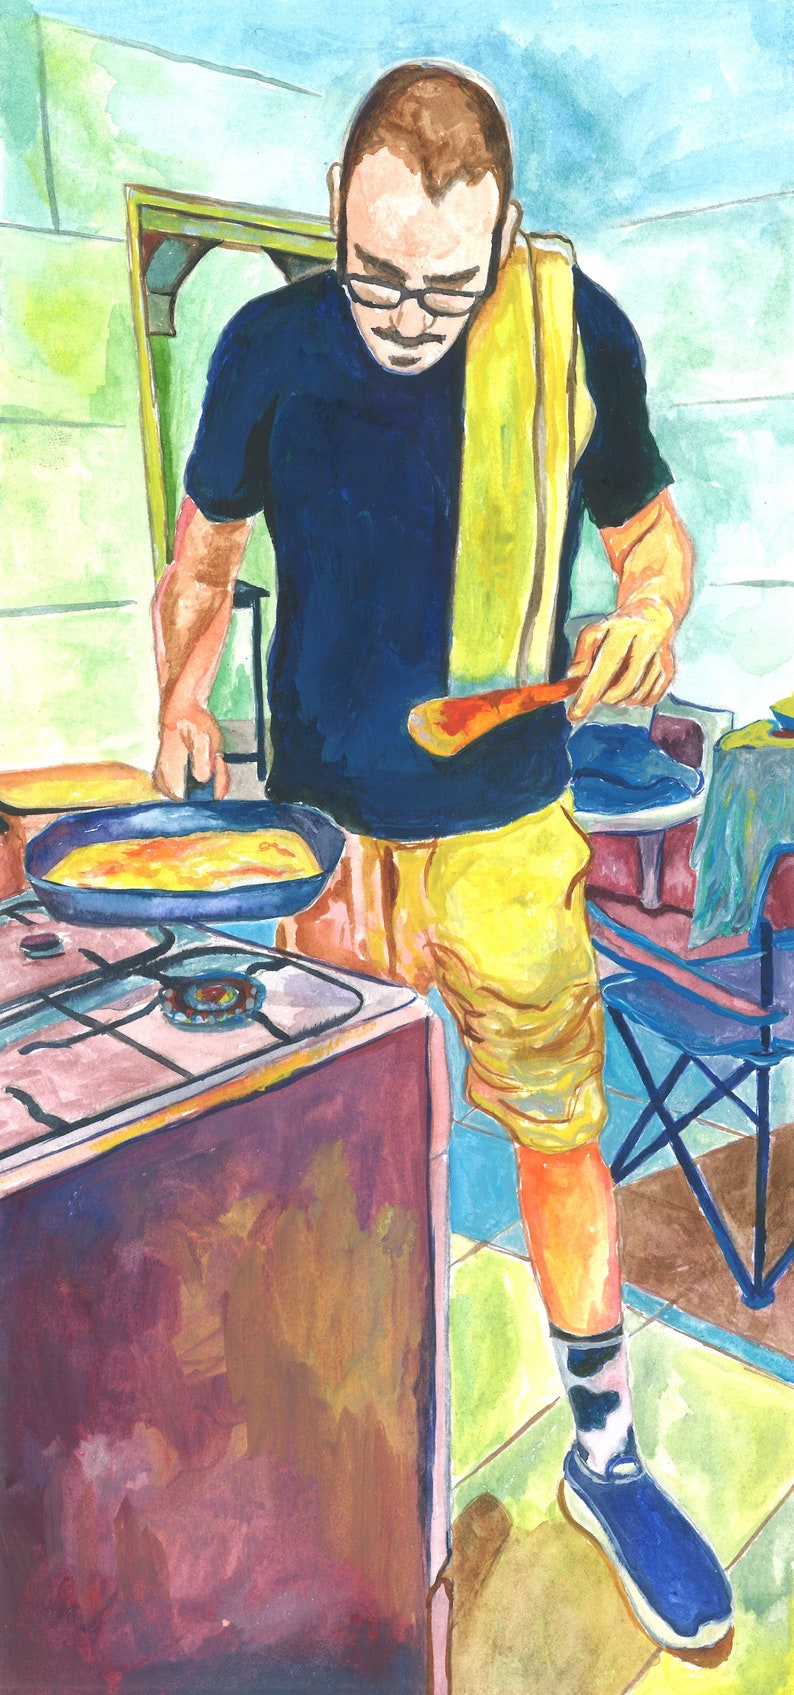 man cooking in the kitchen - watercolor artwork